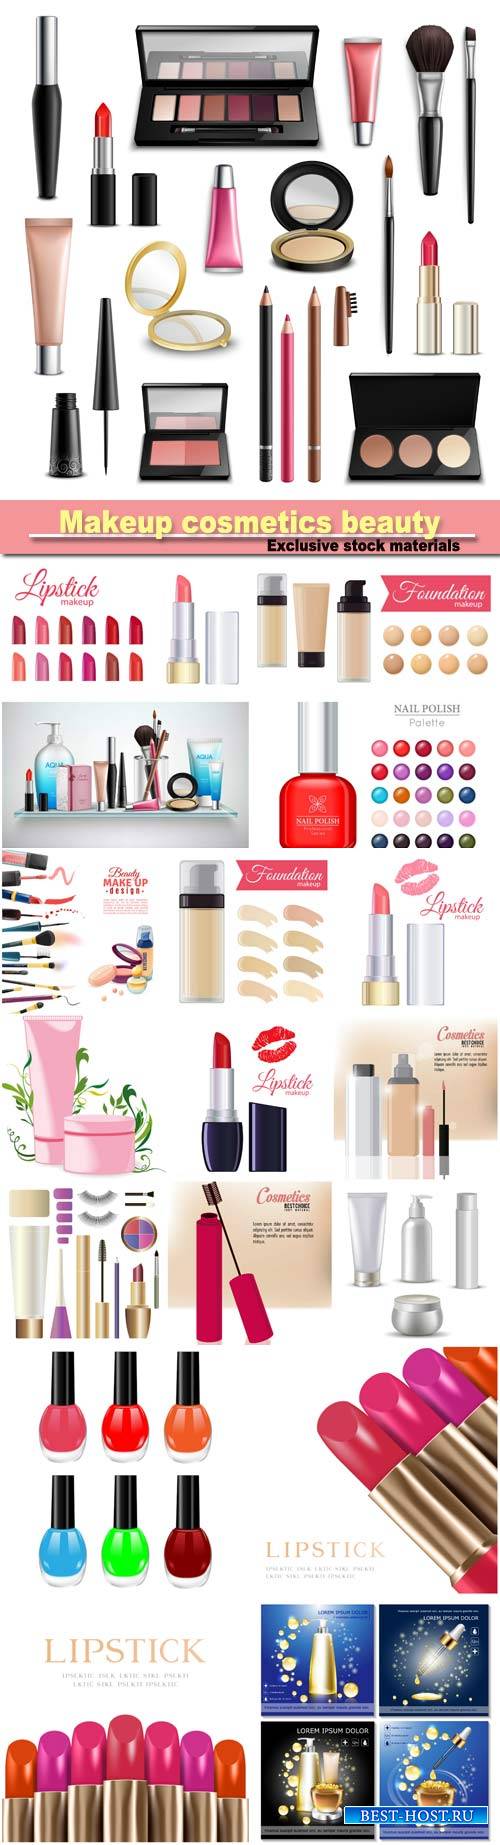 Makeup cosmetics beauty, collection with lip gloss compact powder and eyeliner